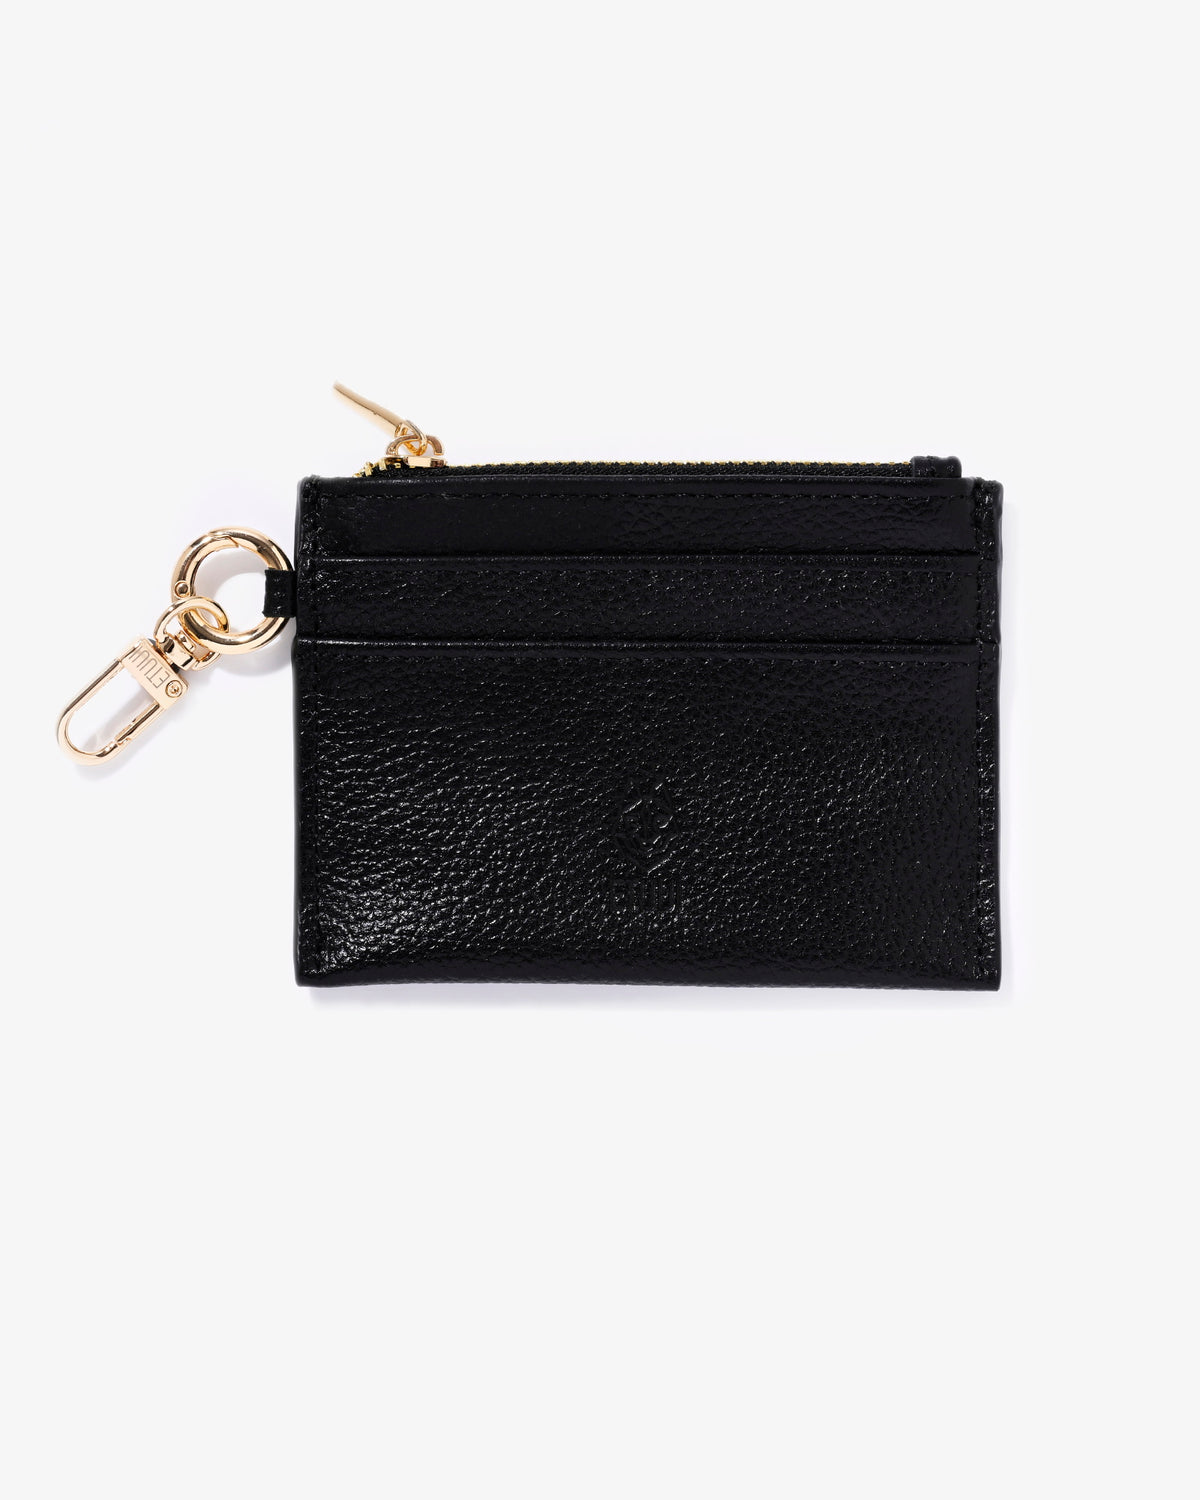 Clip Card Holder with Zipper - Black Gold